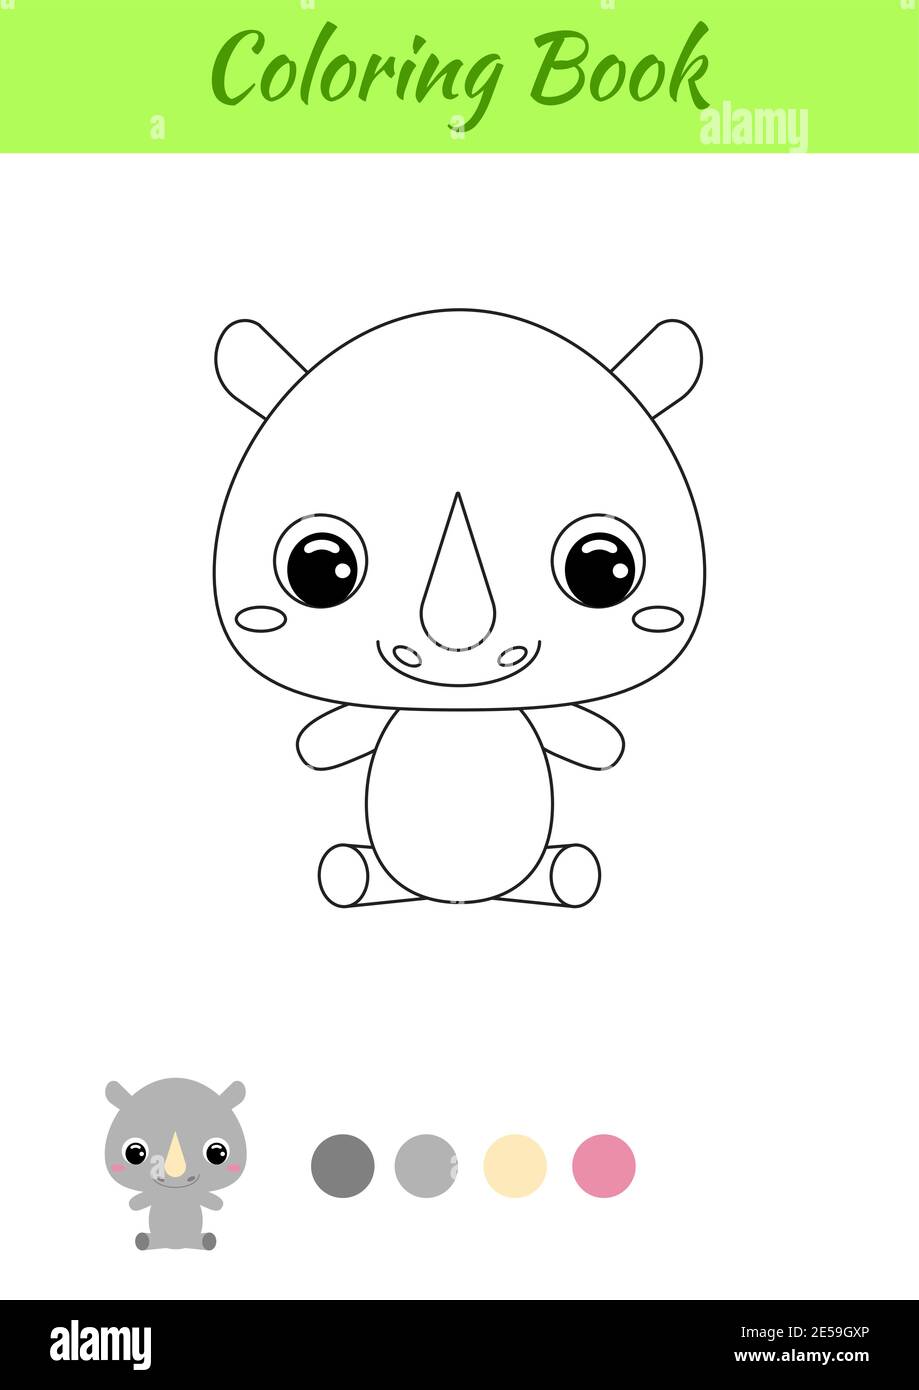 Coloring book little baby rhino sitting. Coloring page for kids. Educational activity for preschool years kids and toddlers with cute animal. Stock Vector